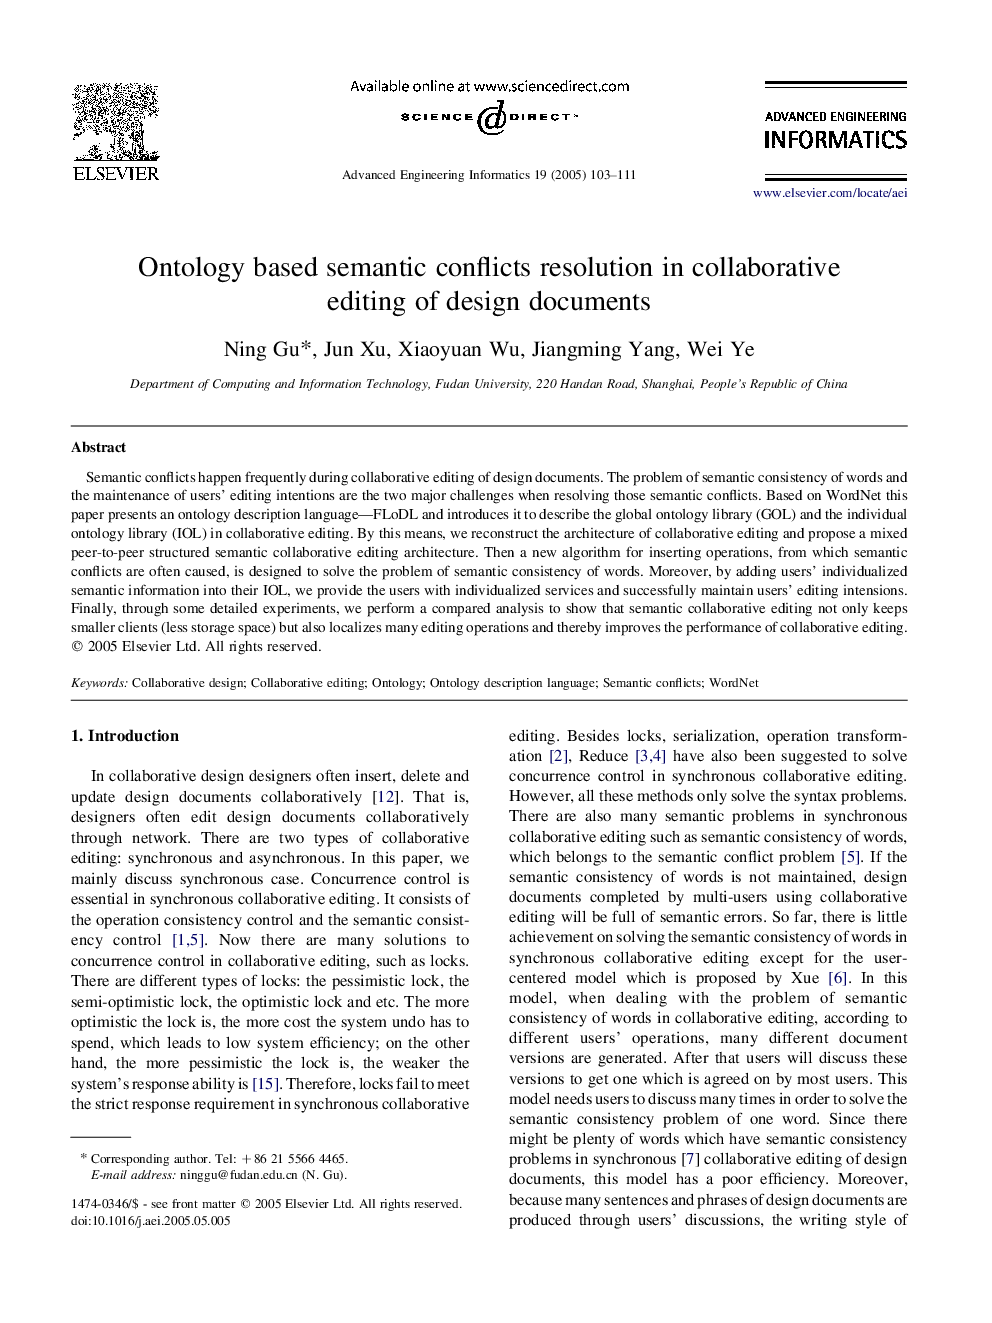 Ontology based semantic conflicts resolution in collaborative editing of design documents